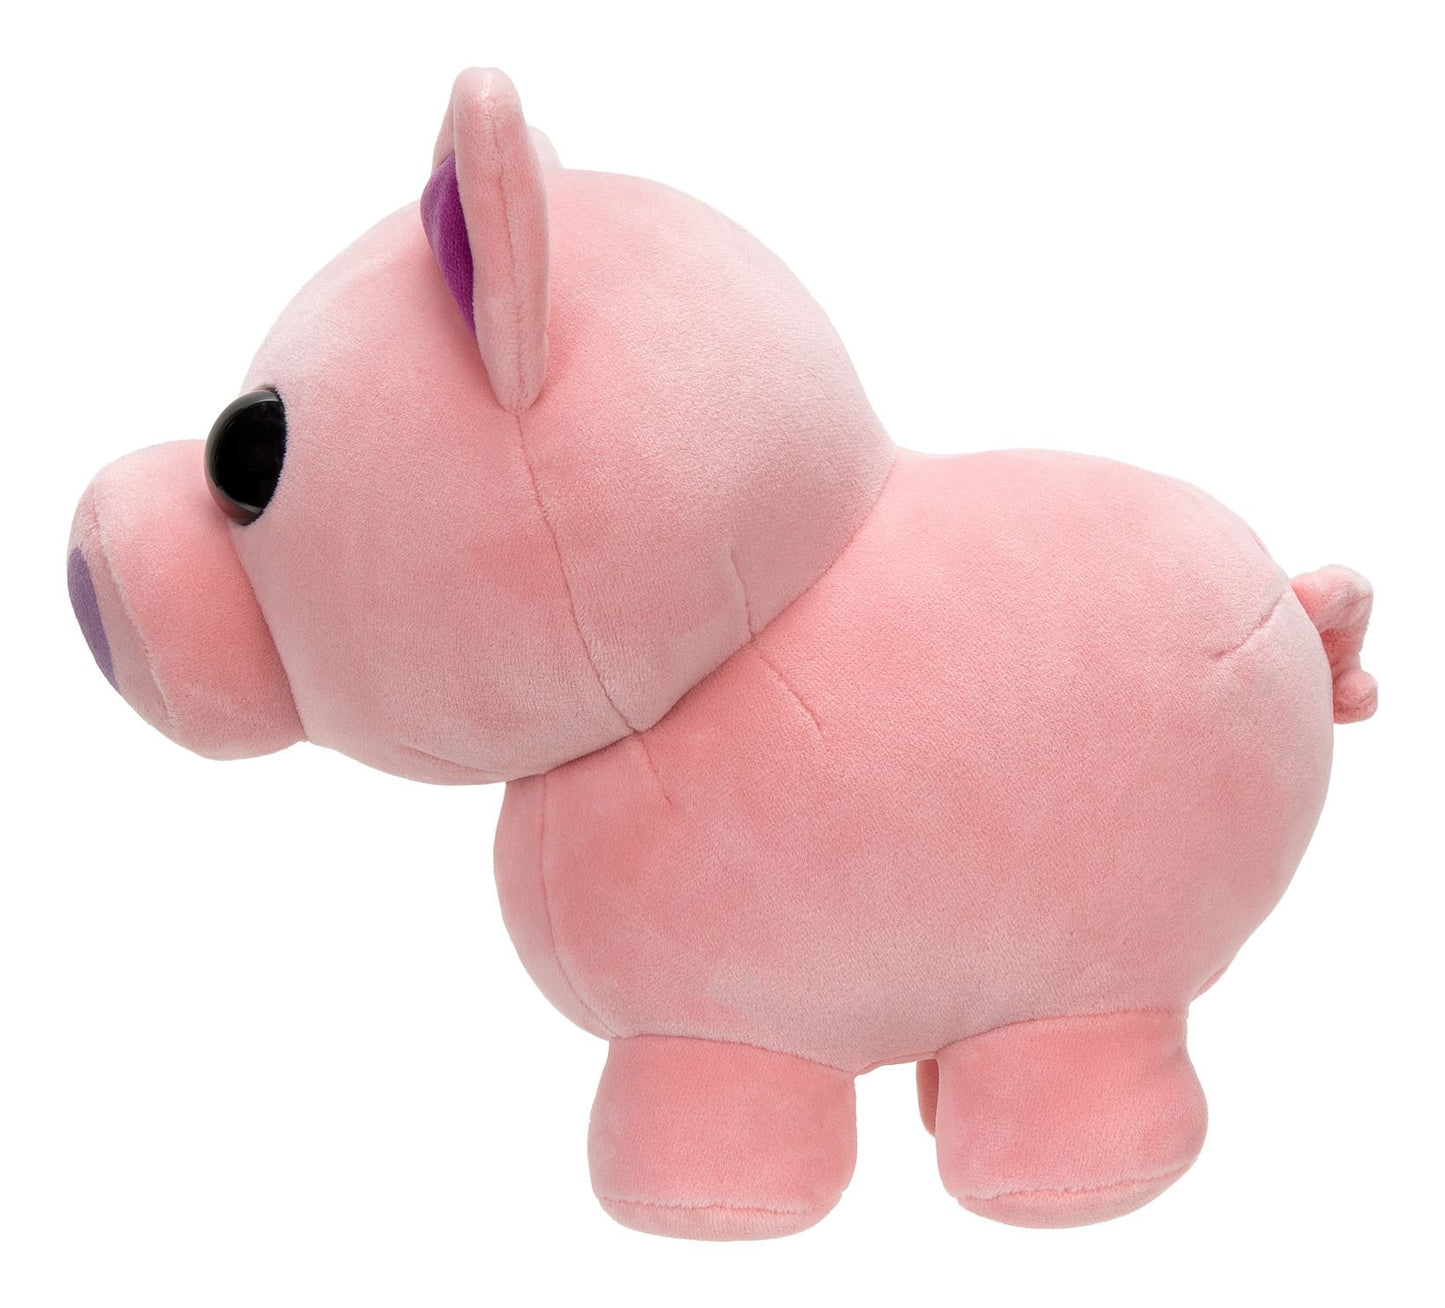 Adopt Me Series 3 Pig 8 Inch Collector Plush Soft Toy